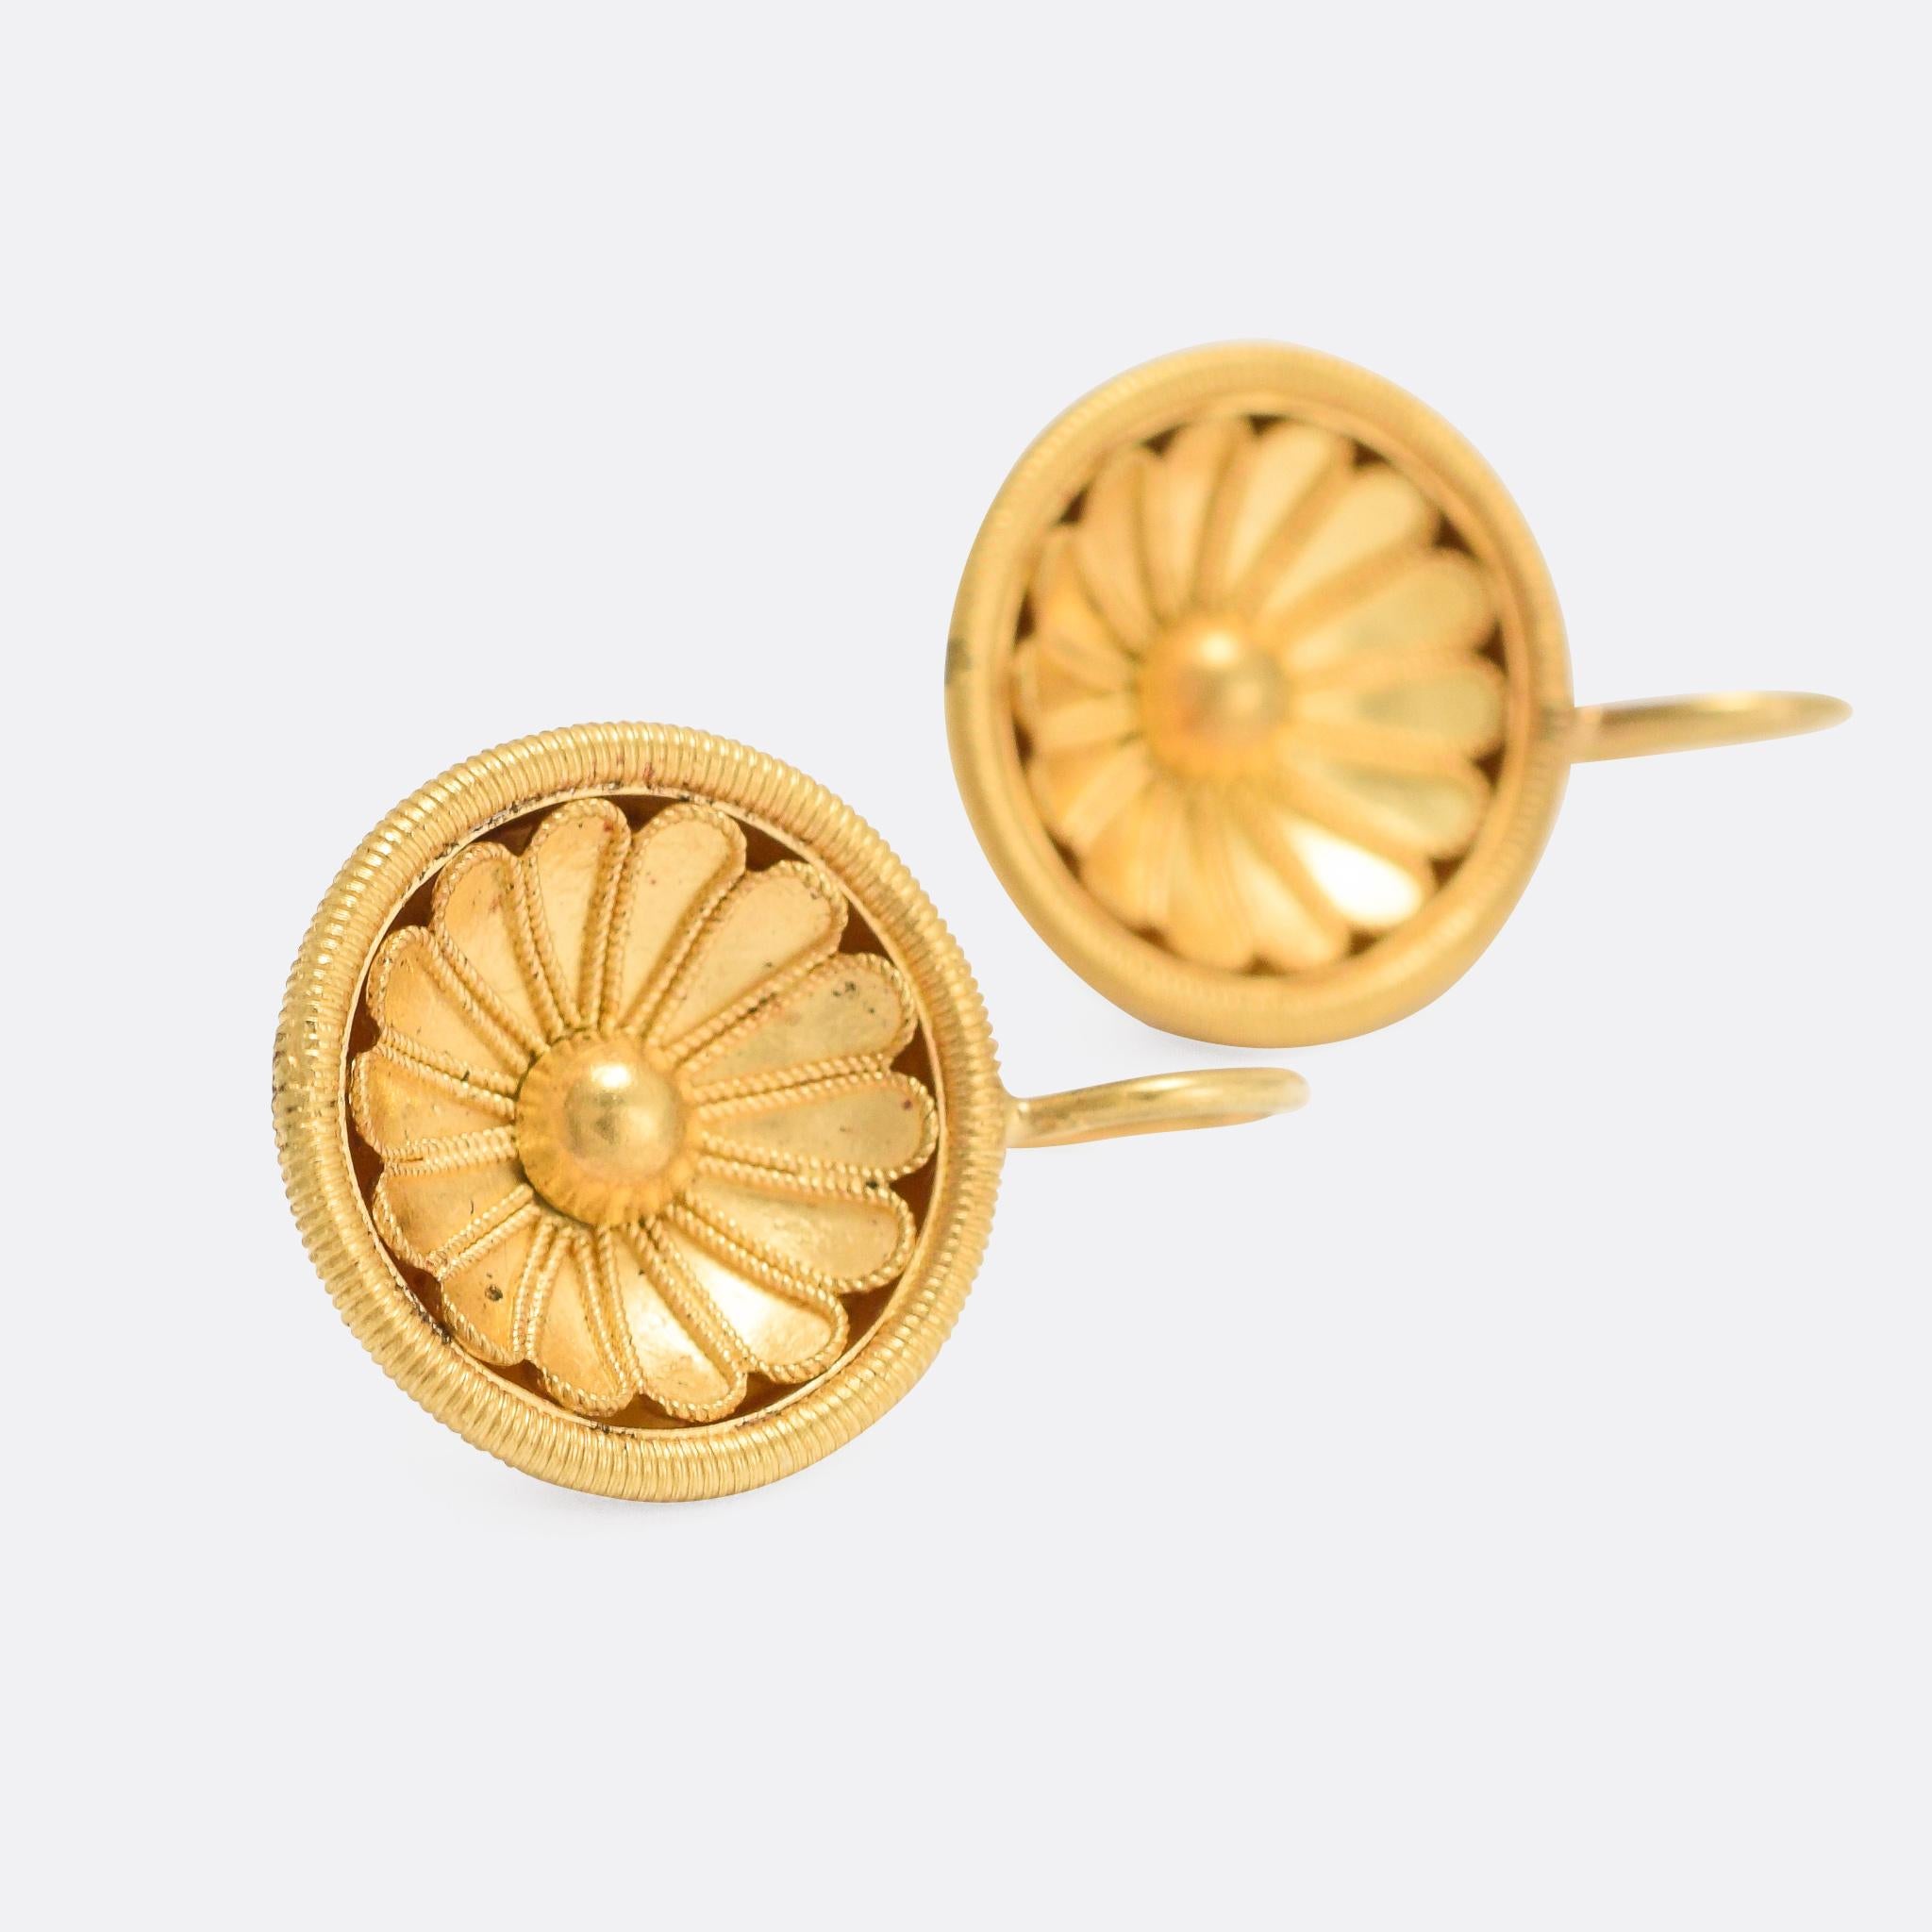 A fine pair of antique earrings crafted in the Etruscan Revival style. The date from circa 1870, modelled as stylised, dish-shaped flowers within a ribbed gold halo. They're fashioned in 15 karat yellow gold and reminiscent, in style, of